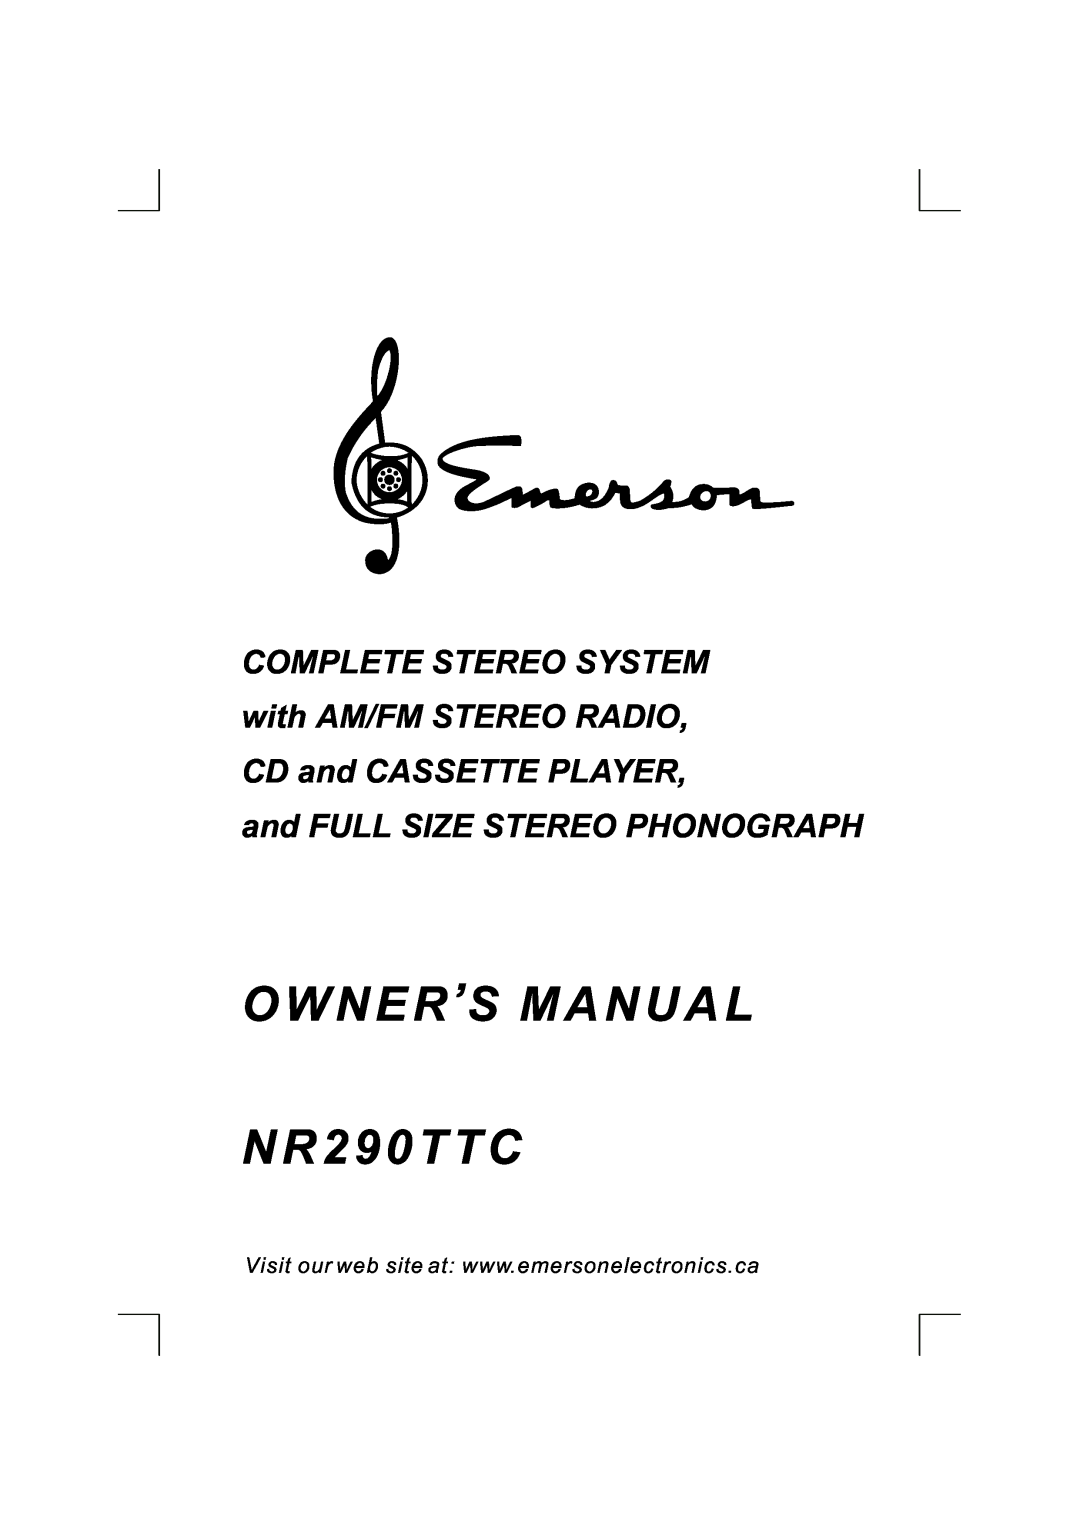 Emerson owner manual O W N E R S MANUAL NR290TTC, and FULL SIZE STEREO PHONOGRAPH 